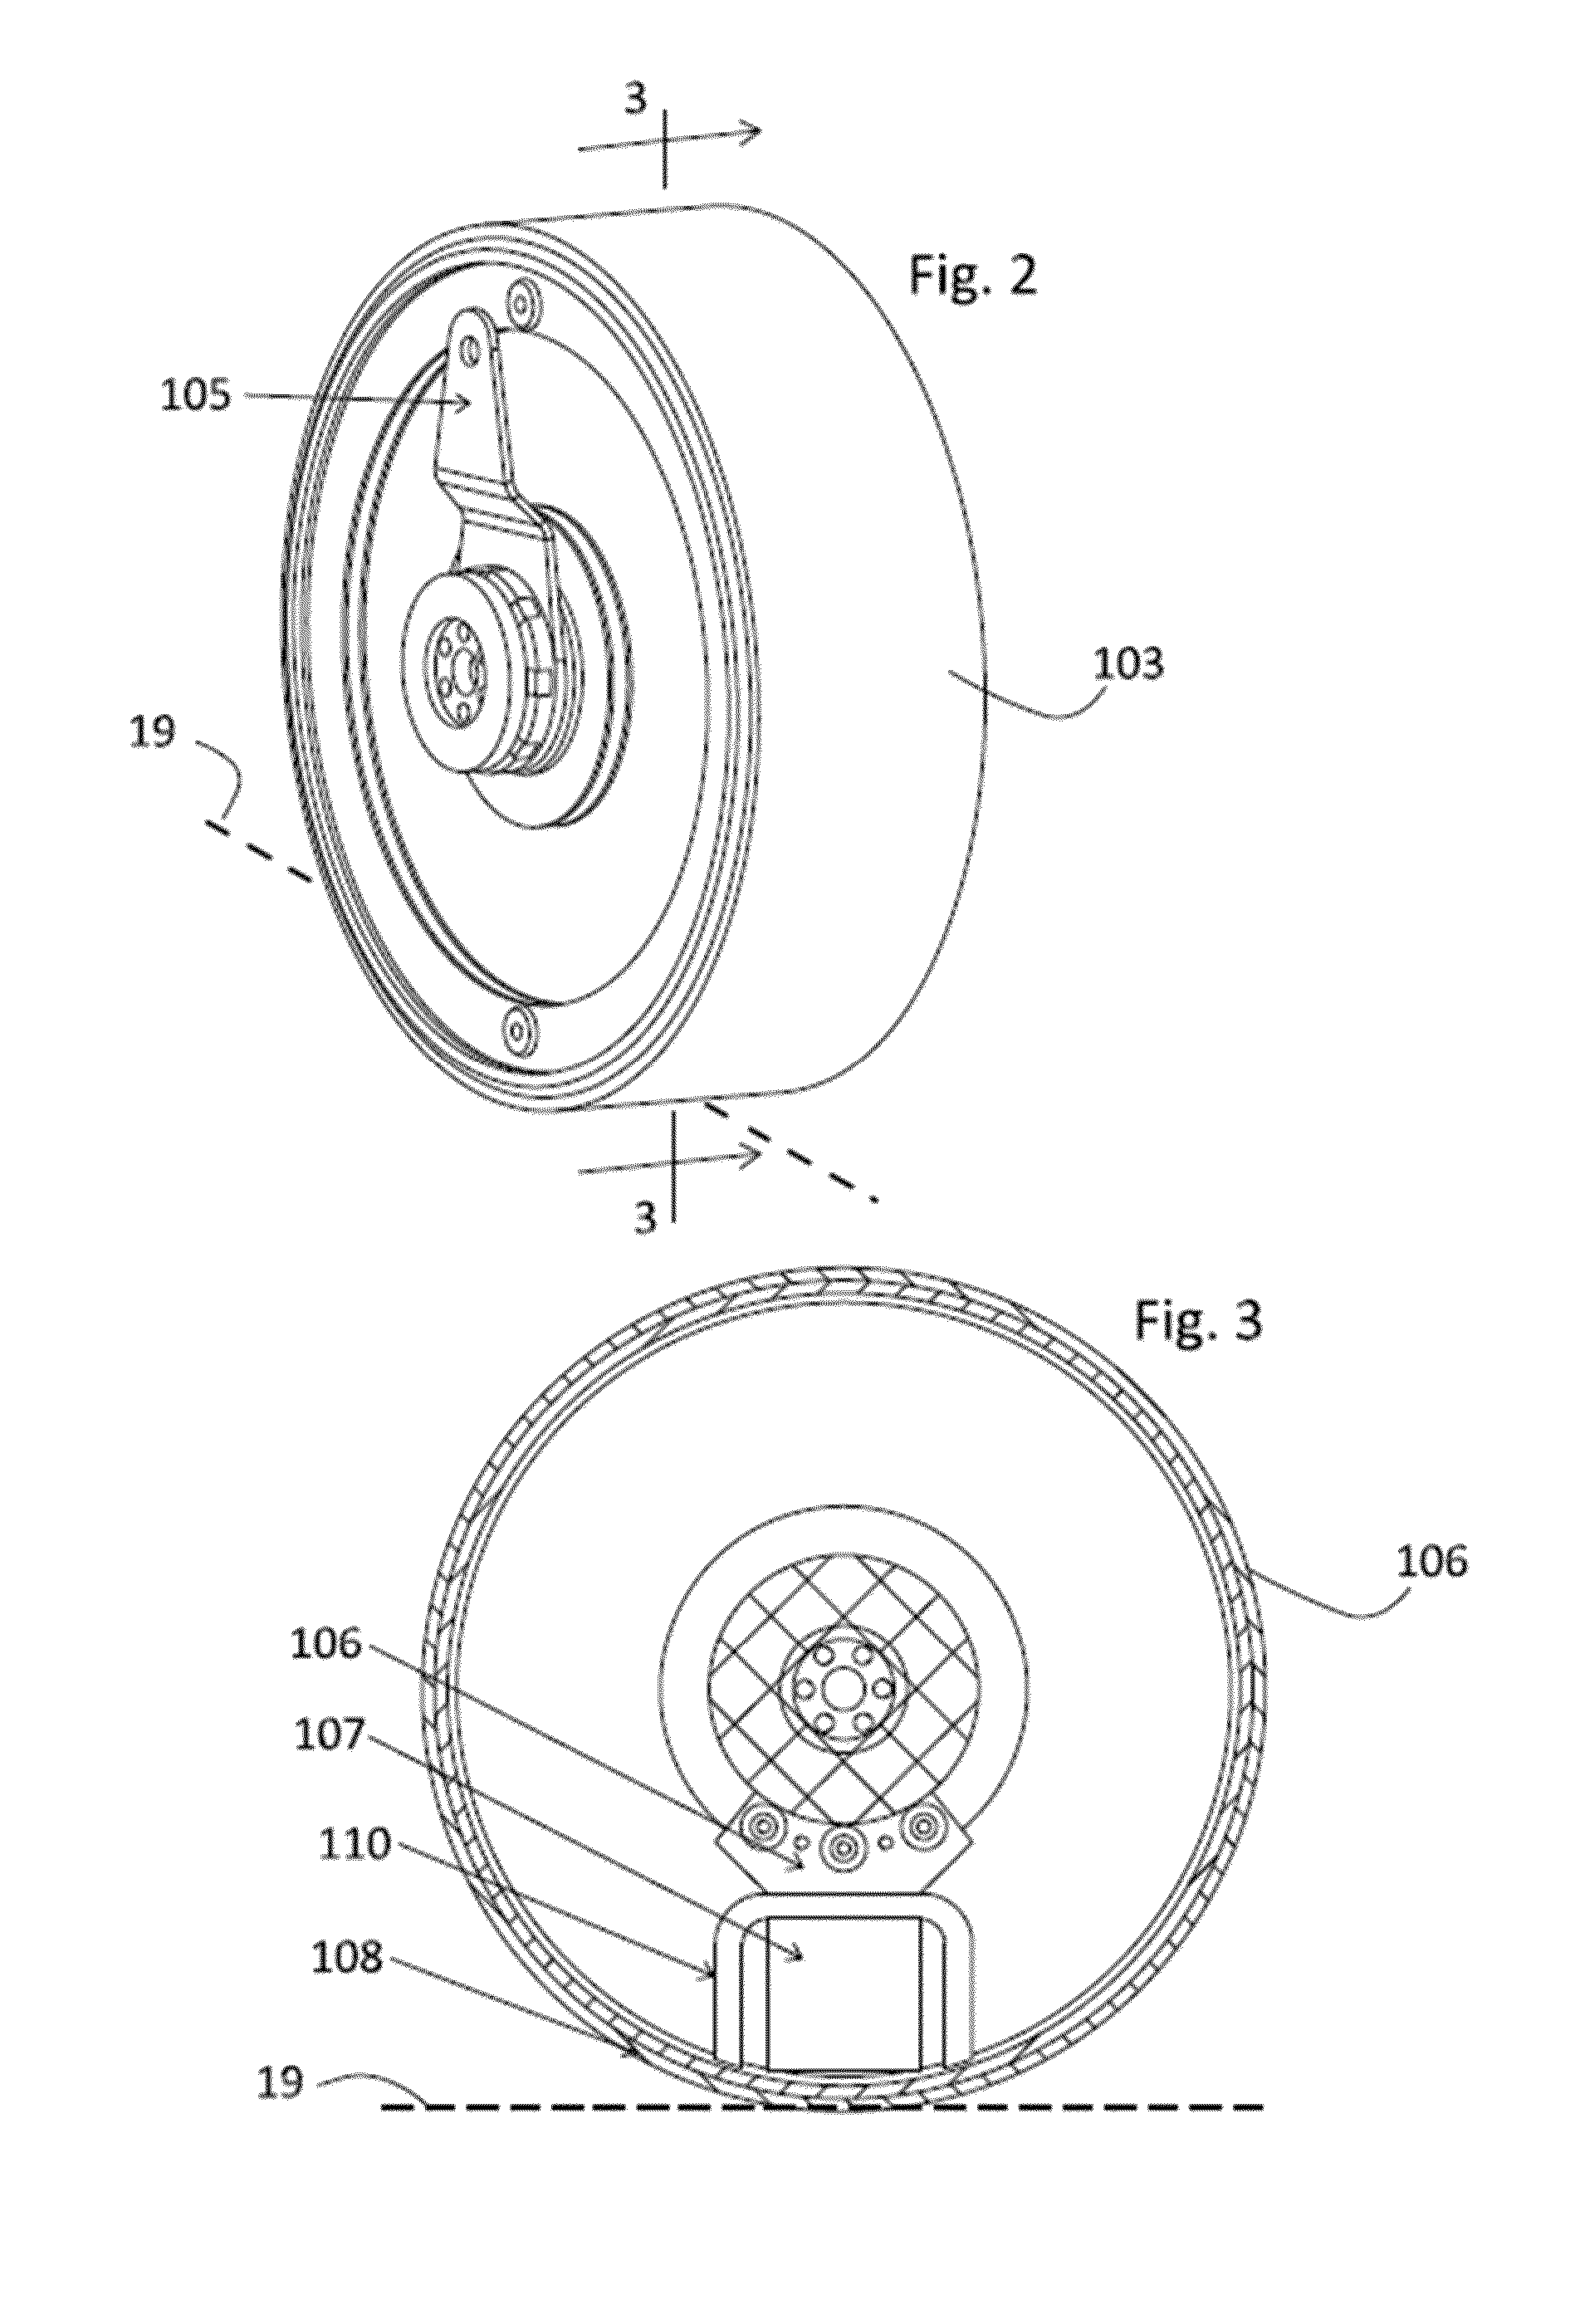 Mobile Operations Chassis with Controlled Magnetic Attraction to Ferrous Surfaces